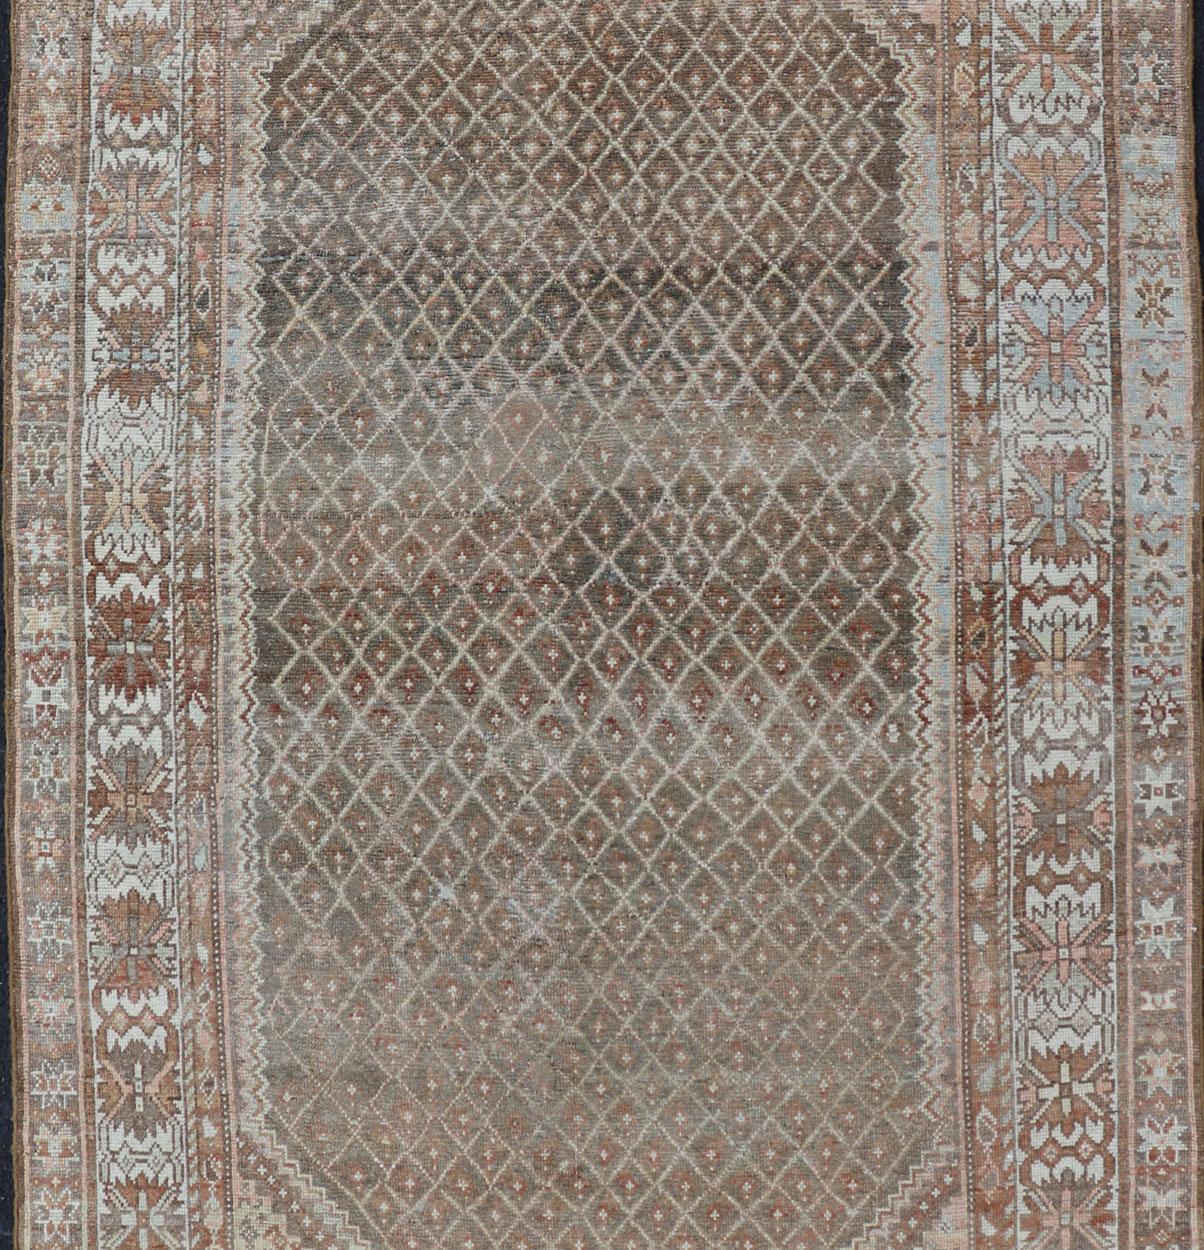 Antique Persian Kurdish Rug in Gray/Brown Background with Taupe Tan & Soft Red  For Sale 3